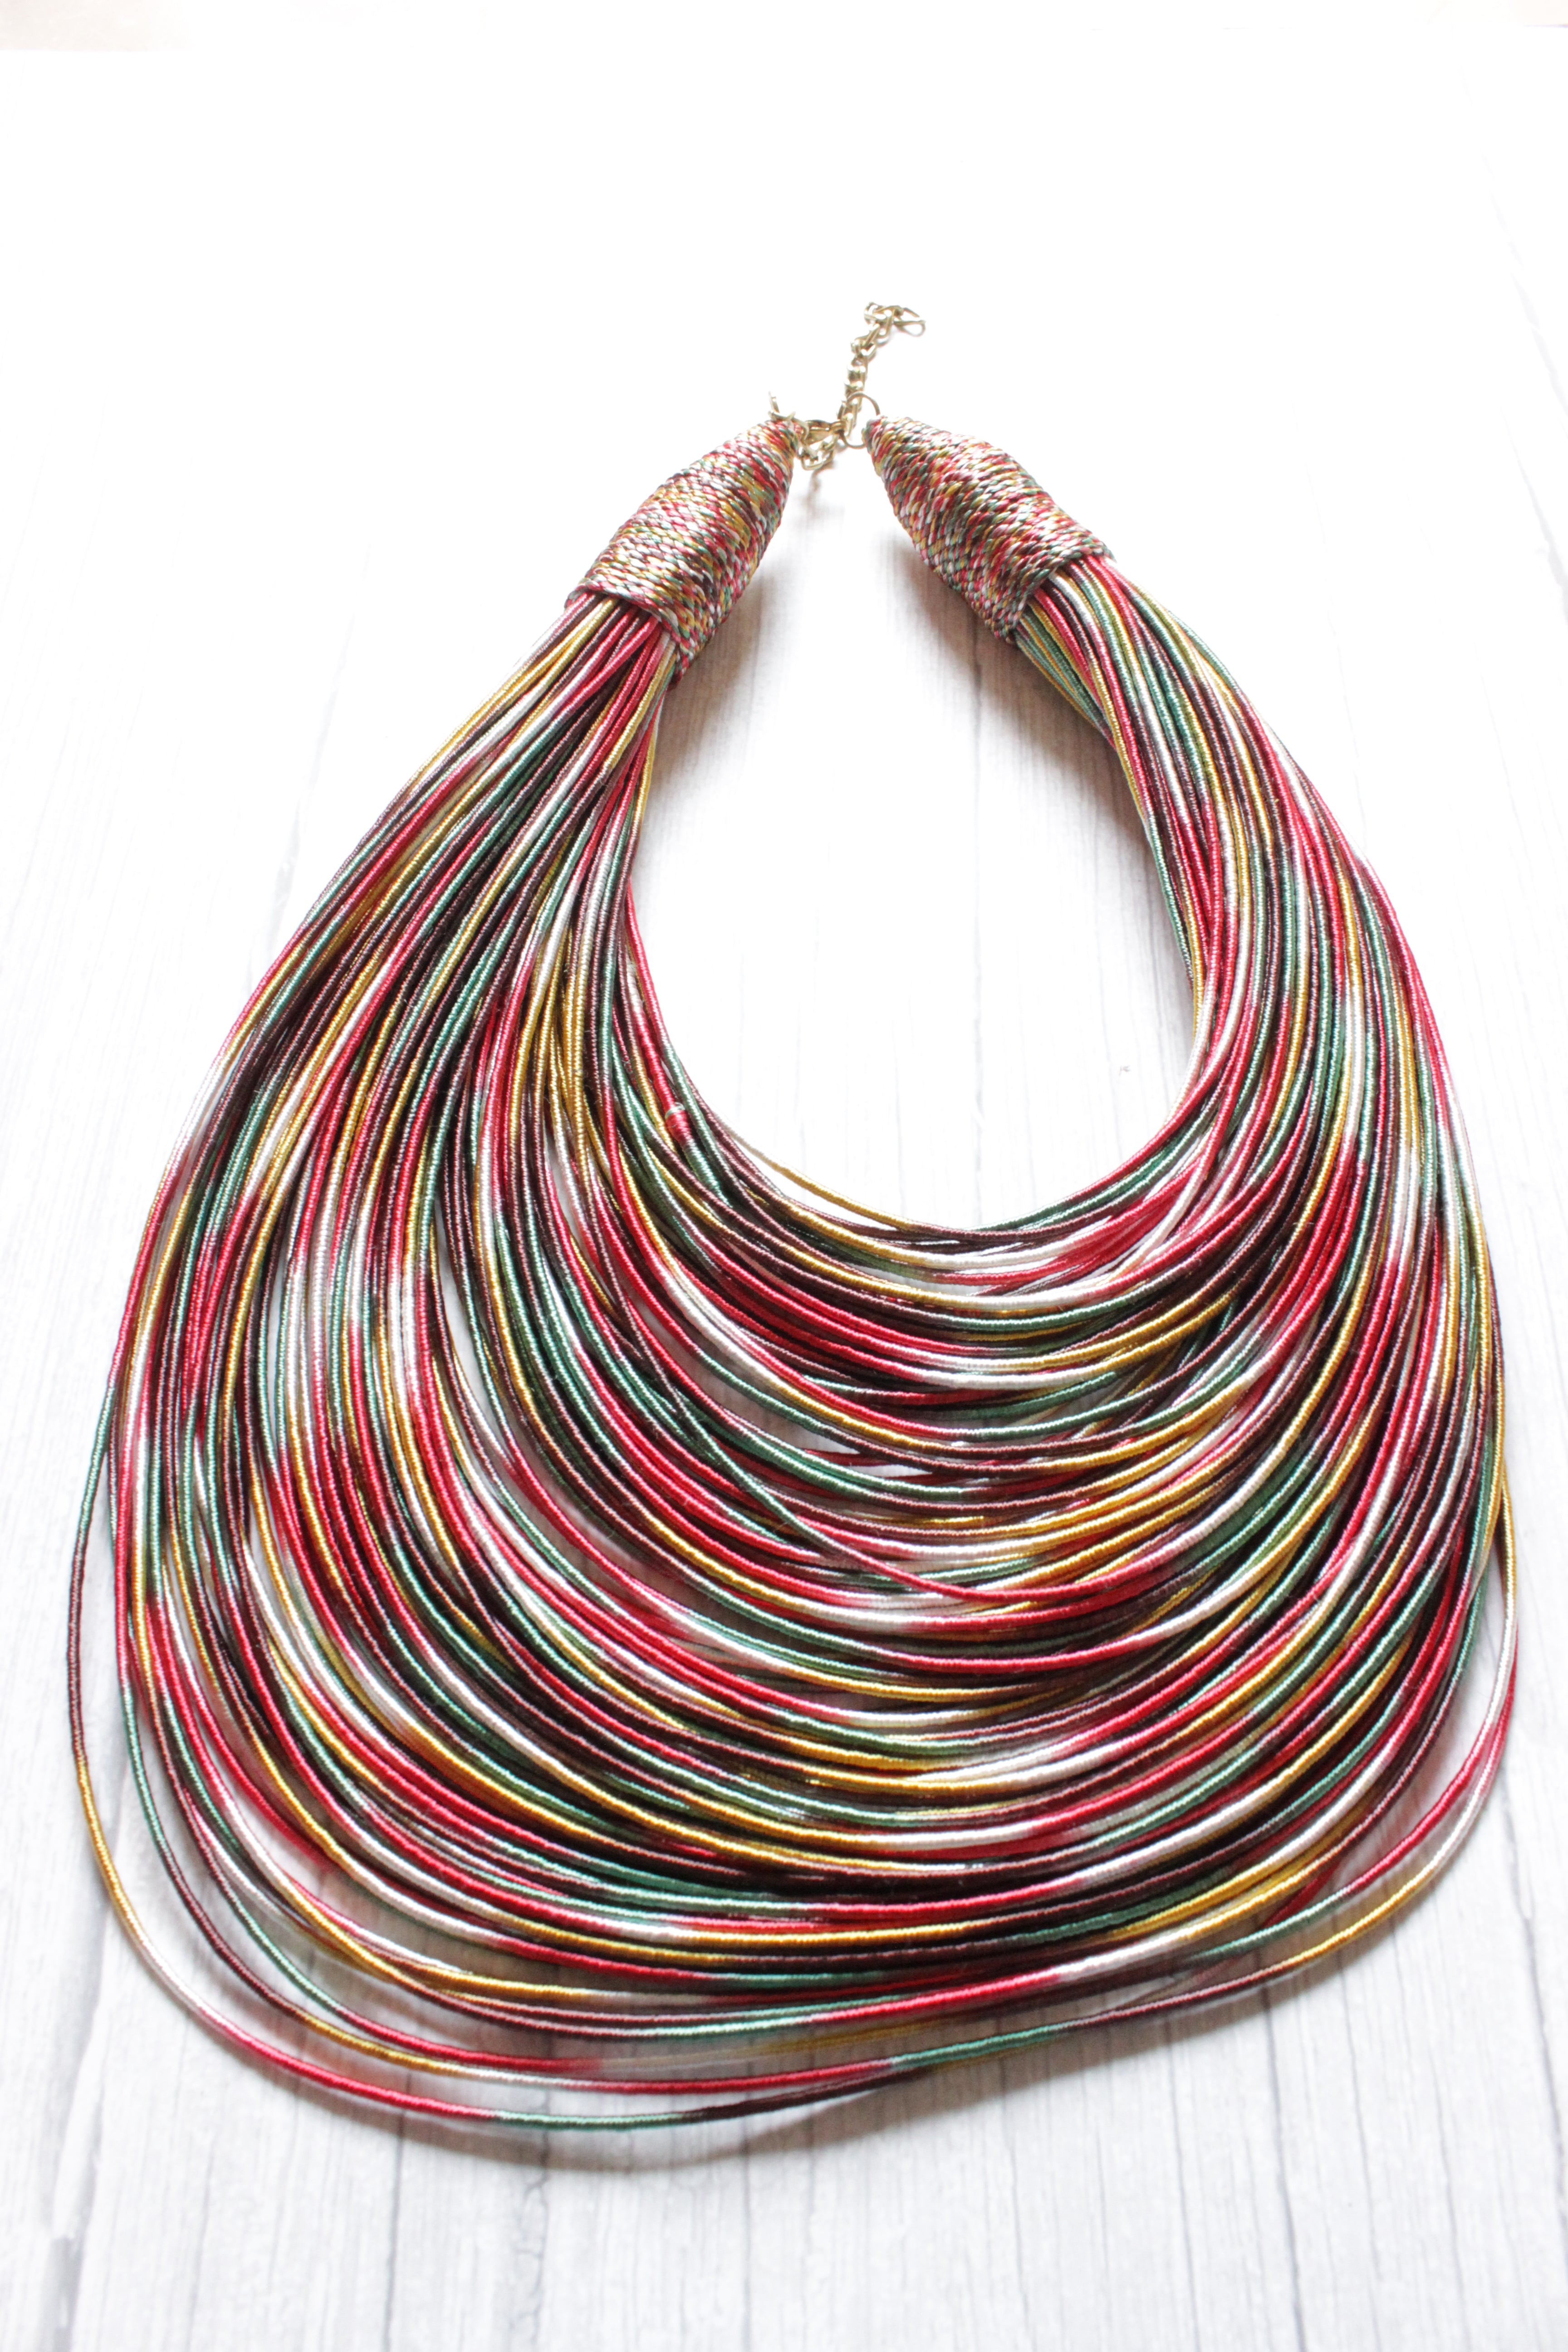 Multi-Color Handmade Silk Threads Multi-Layer Statement African Choker Necklace